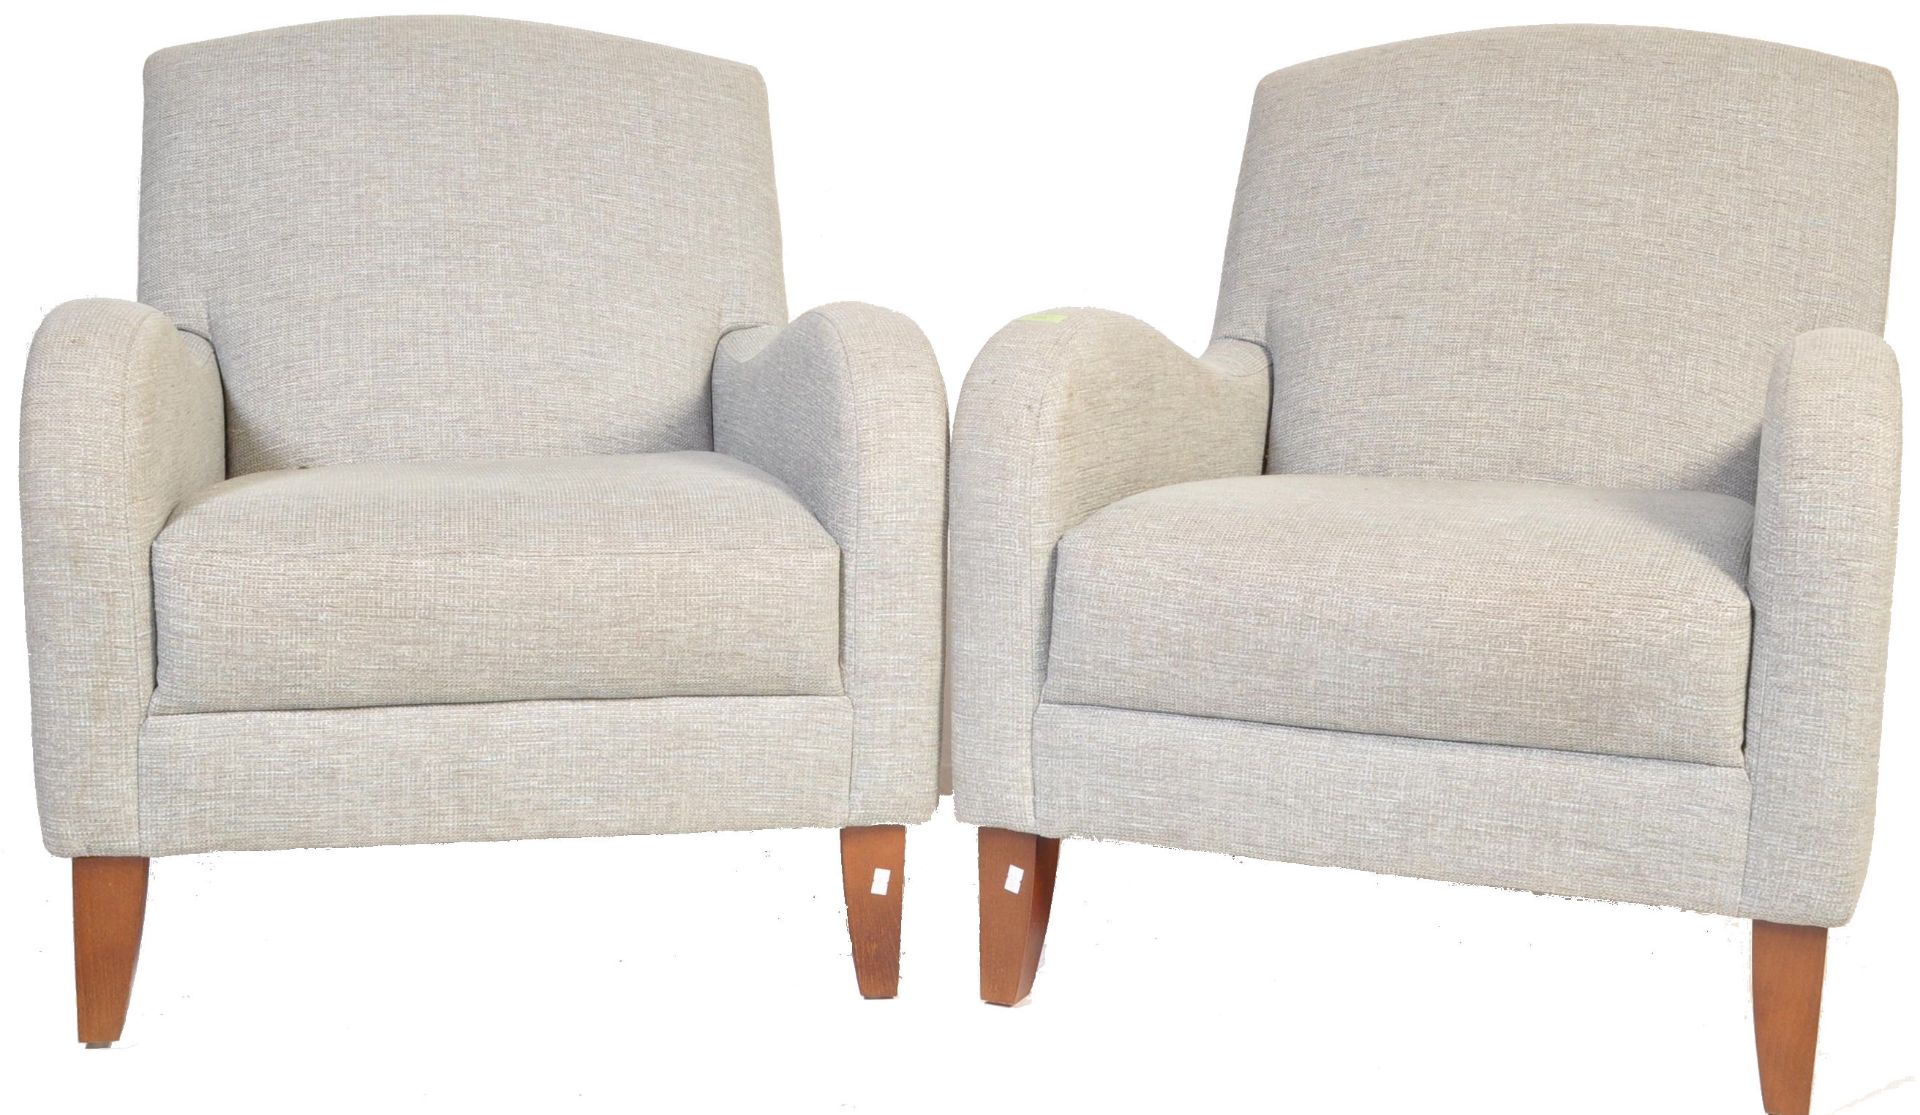 PAIR OF CONTEMPORARY JHOWARD STYLE ARMCHAIRS